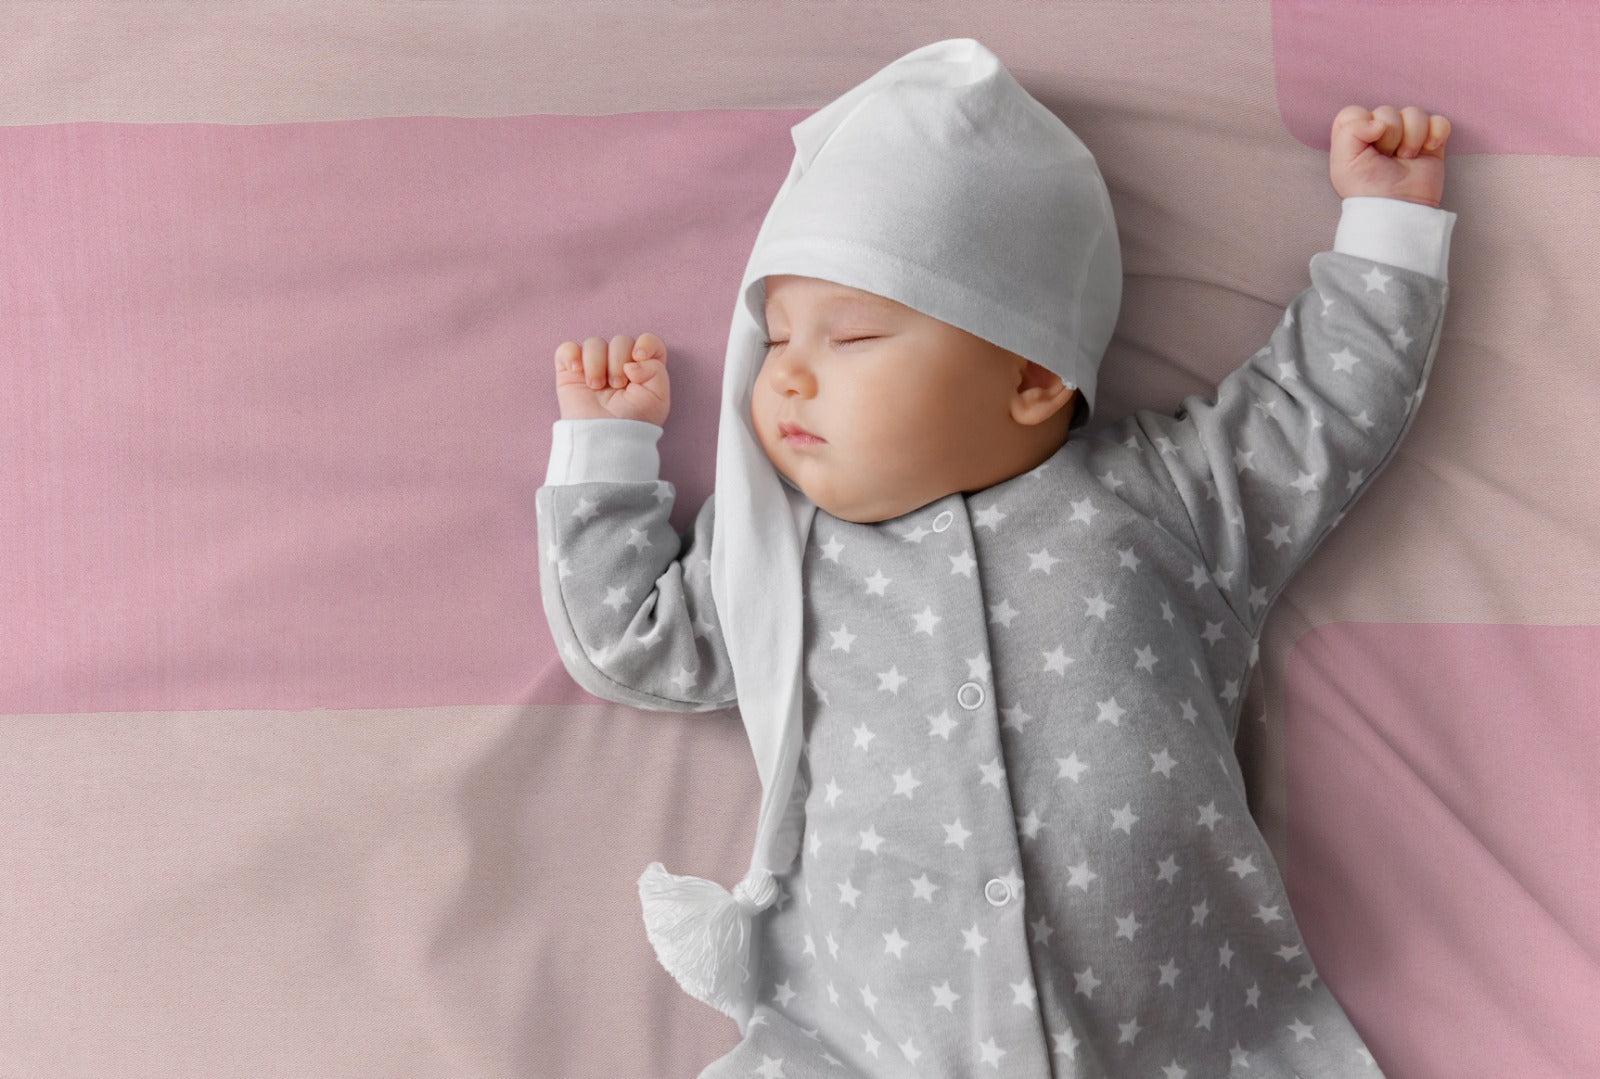 CATERING TO YOUR BABY’S NEEDS IN STYLE – THE NEW NURSERY ESSENTIAL, THE TURKISH TOWEL